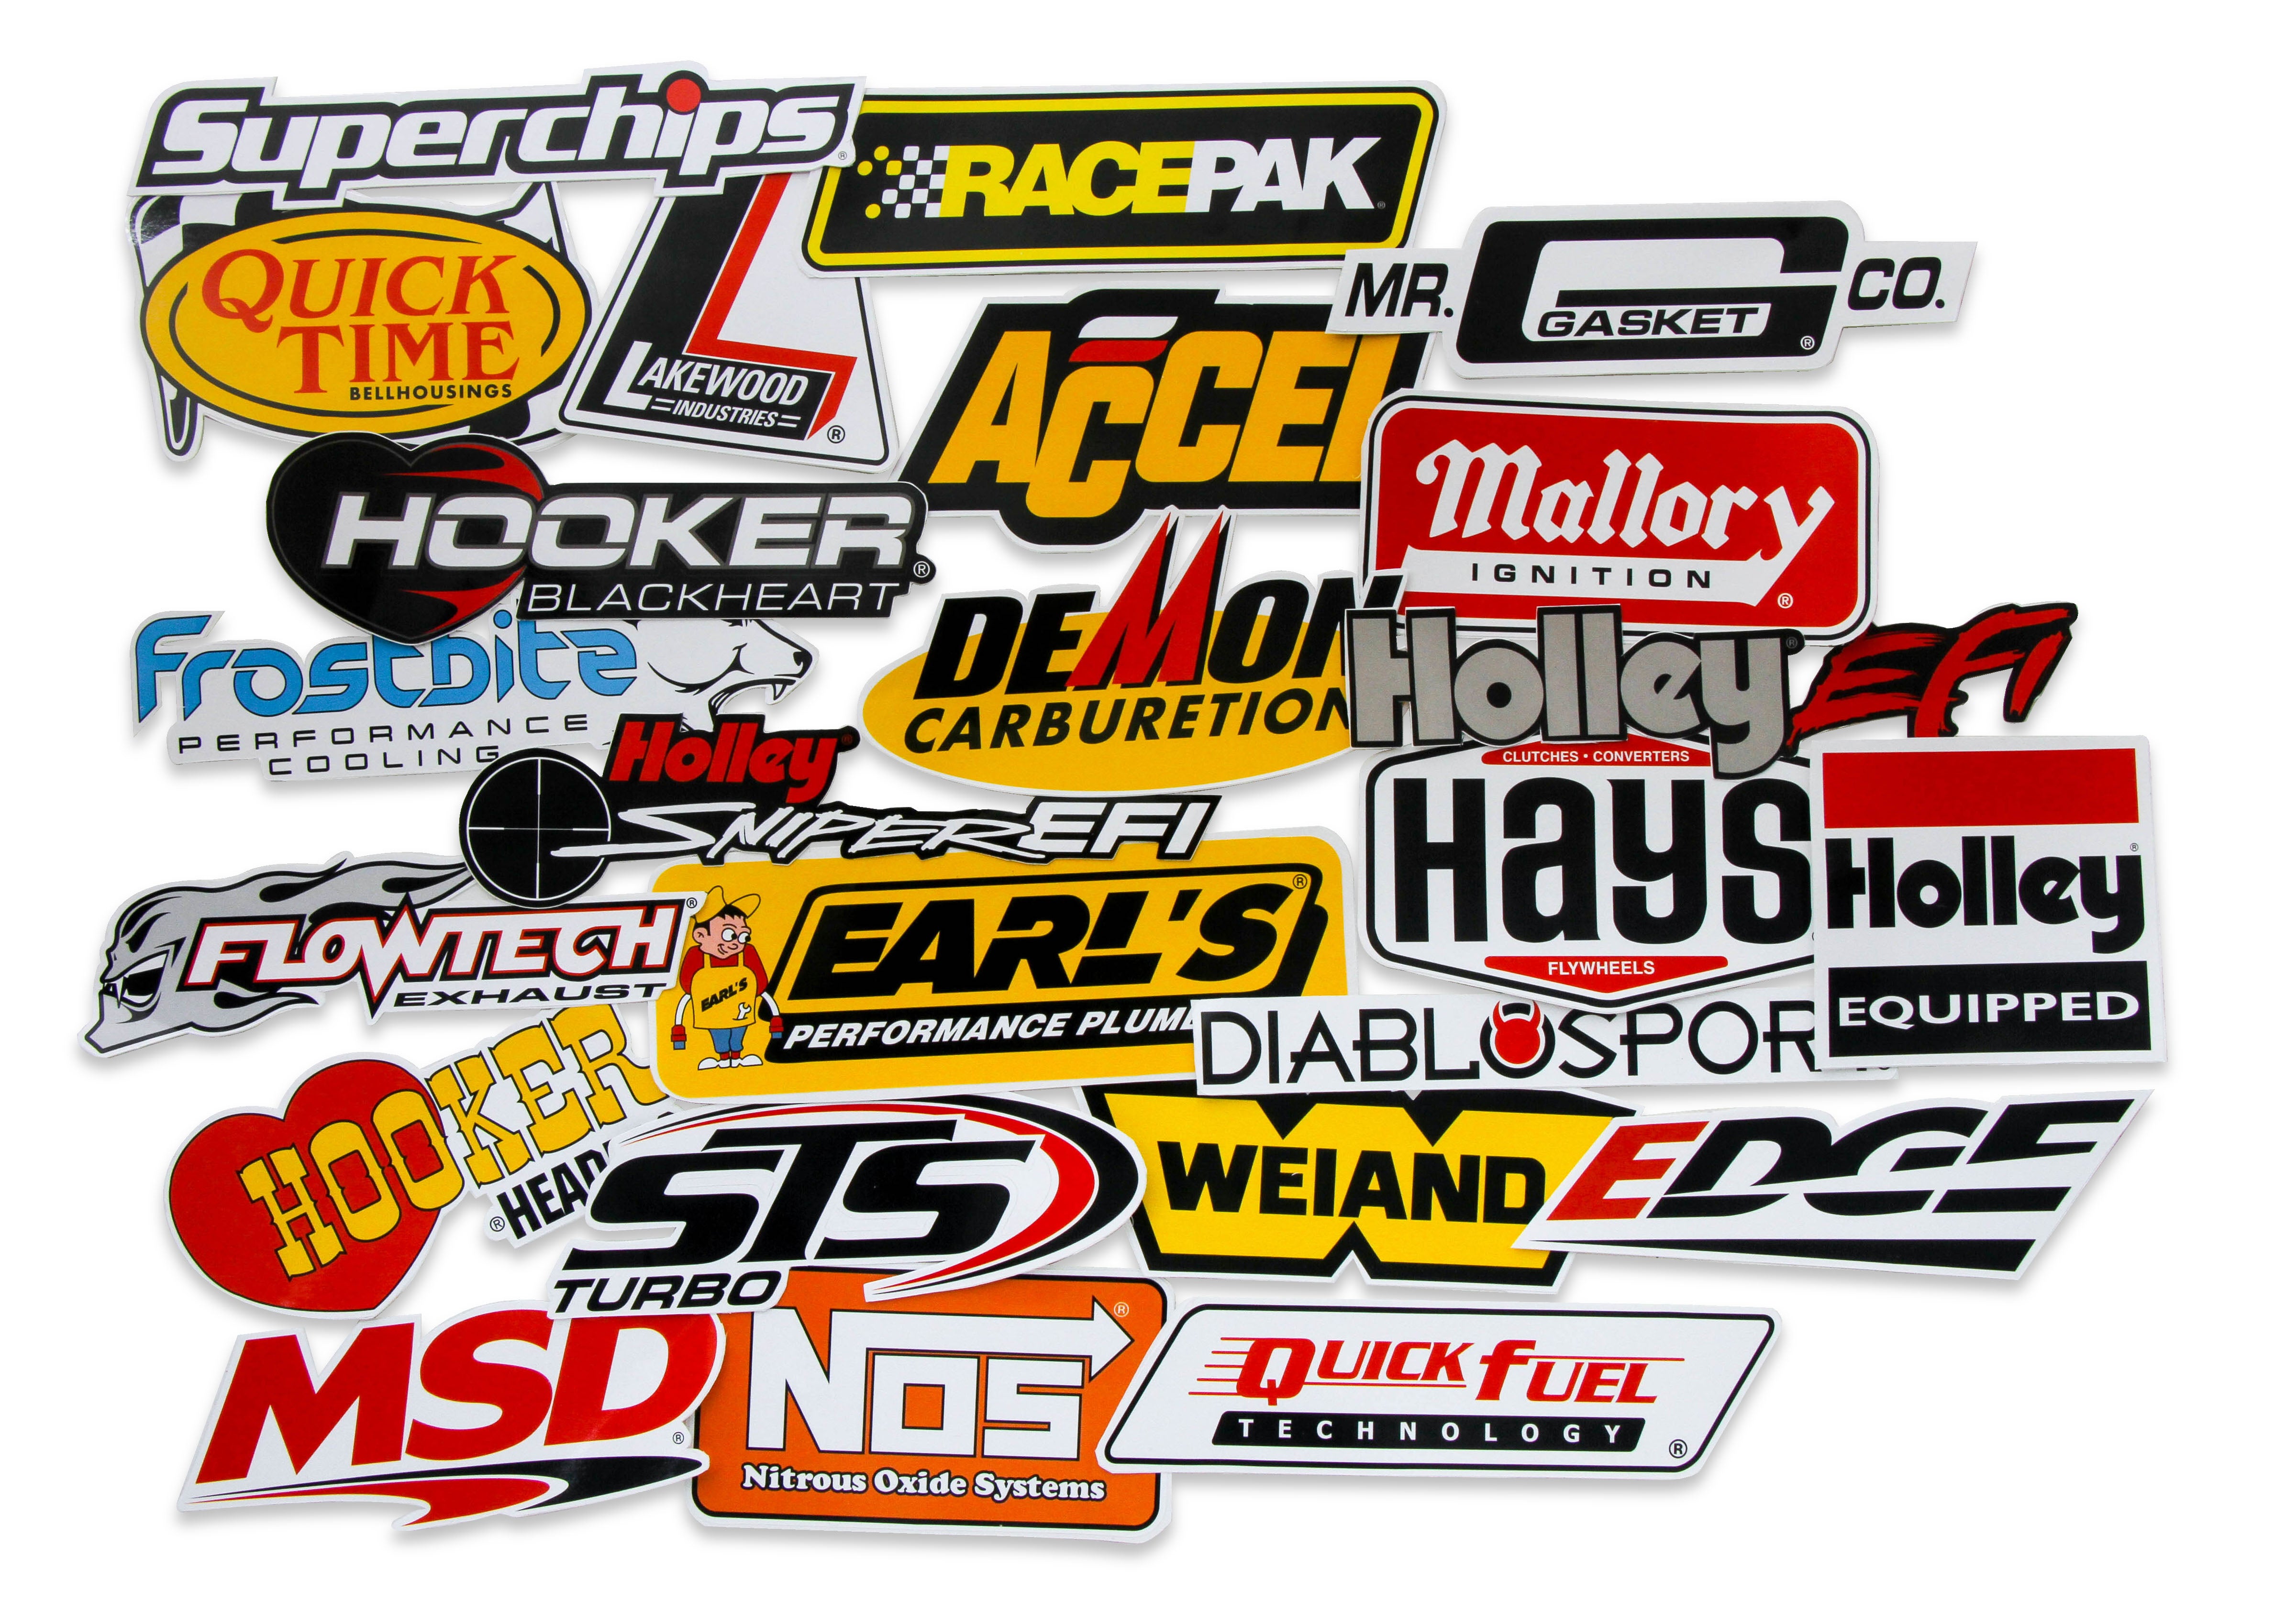 Holley Exterior Decal 36-462